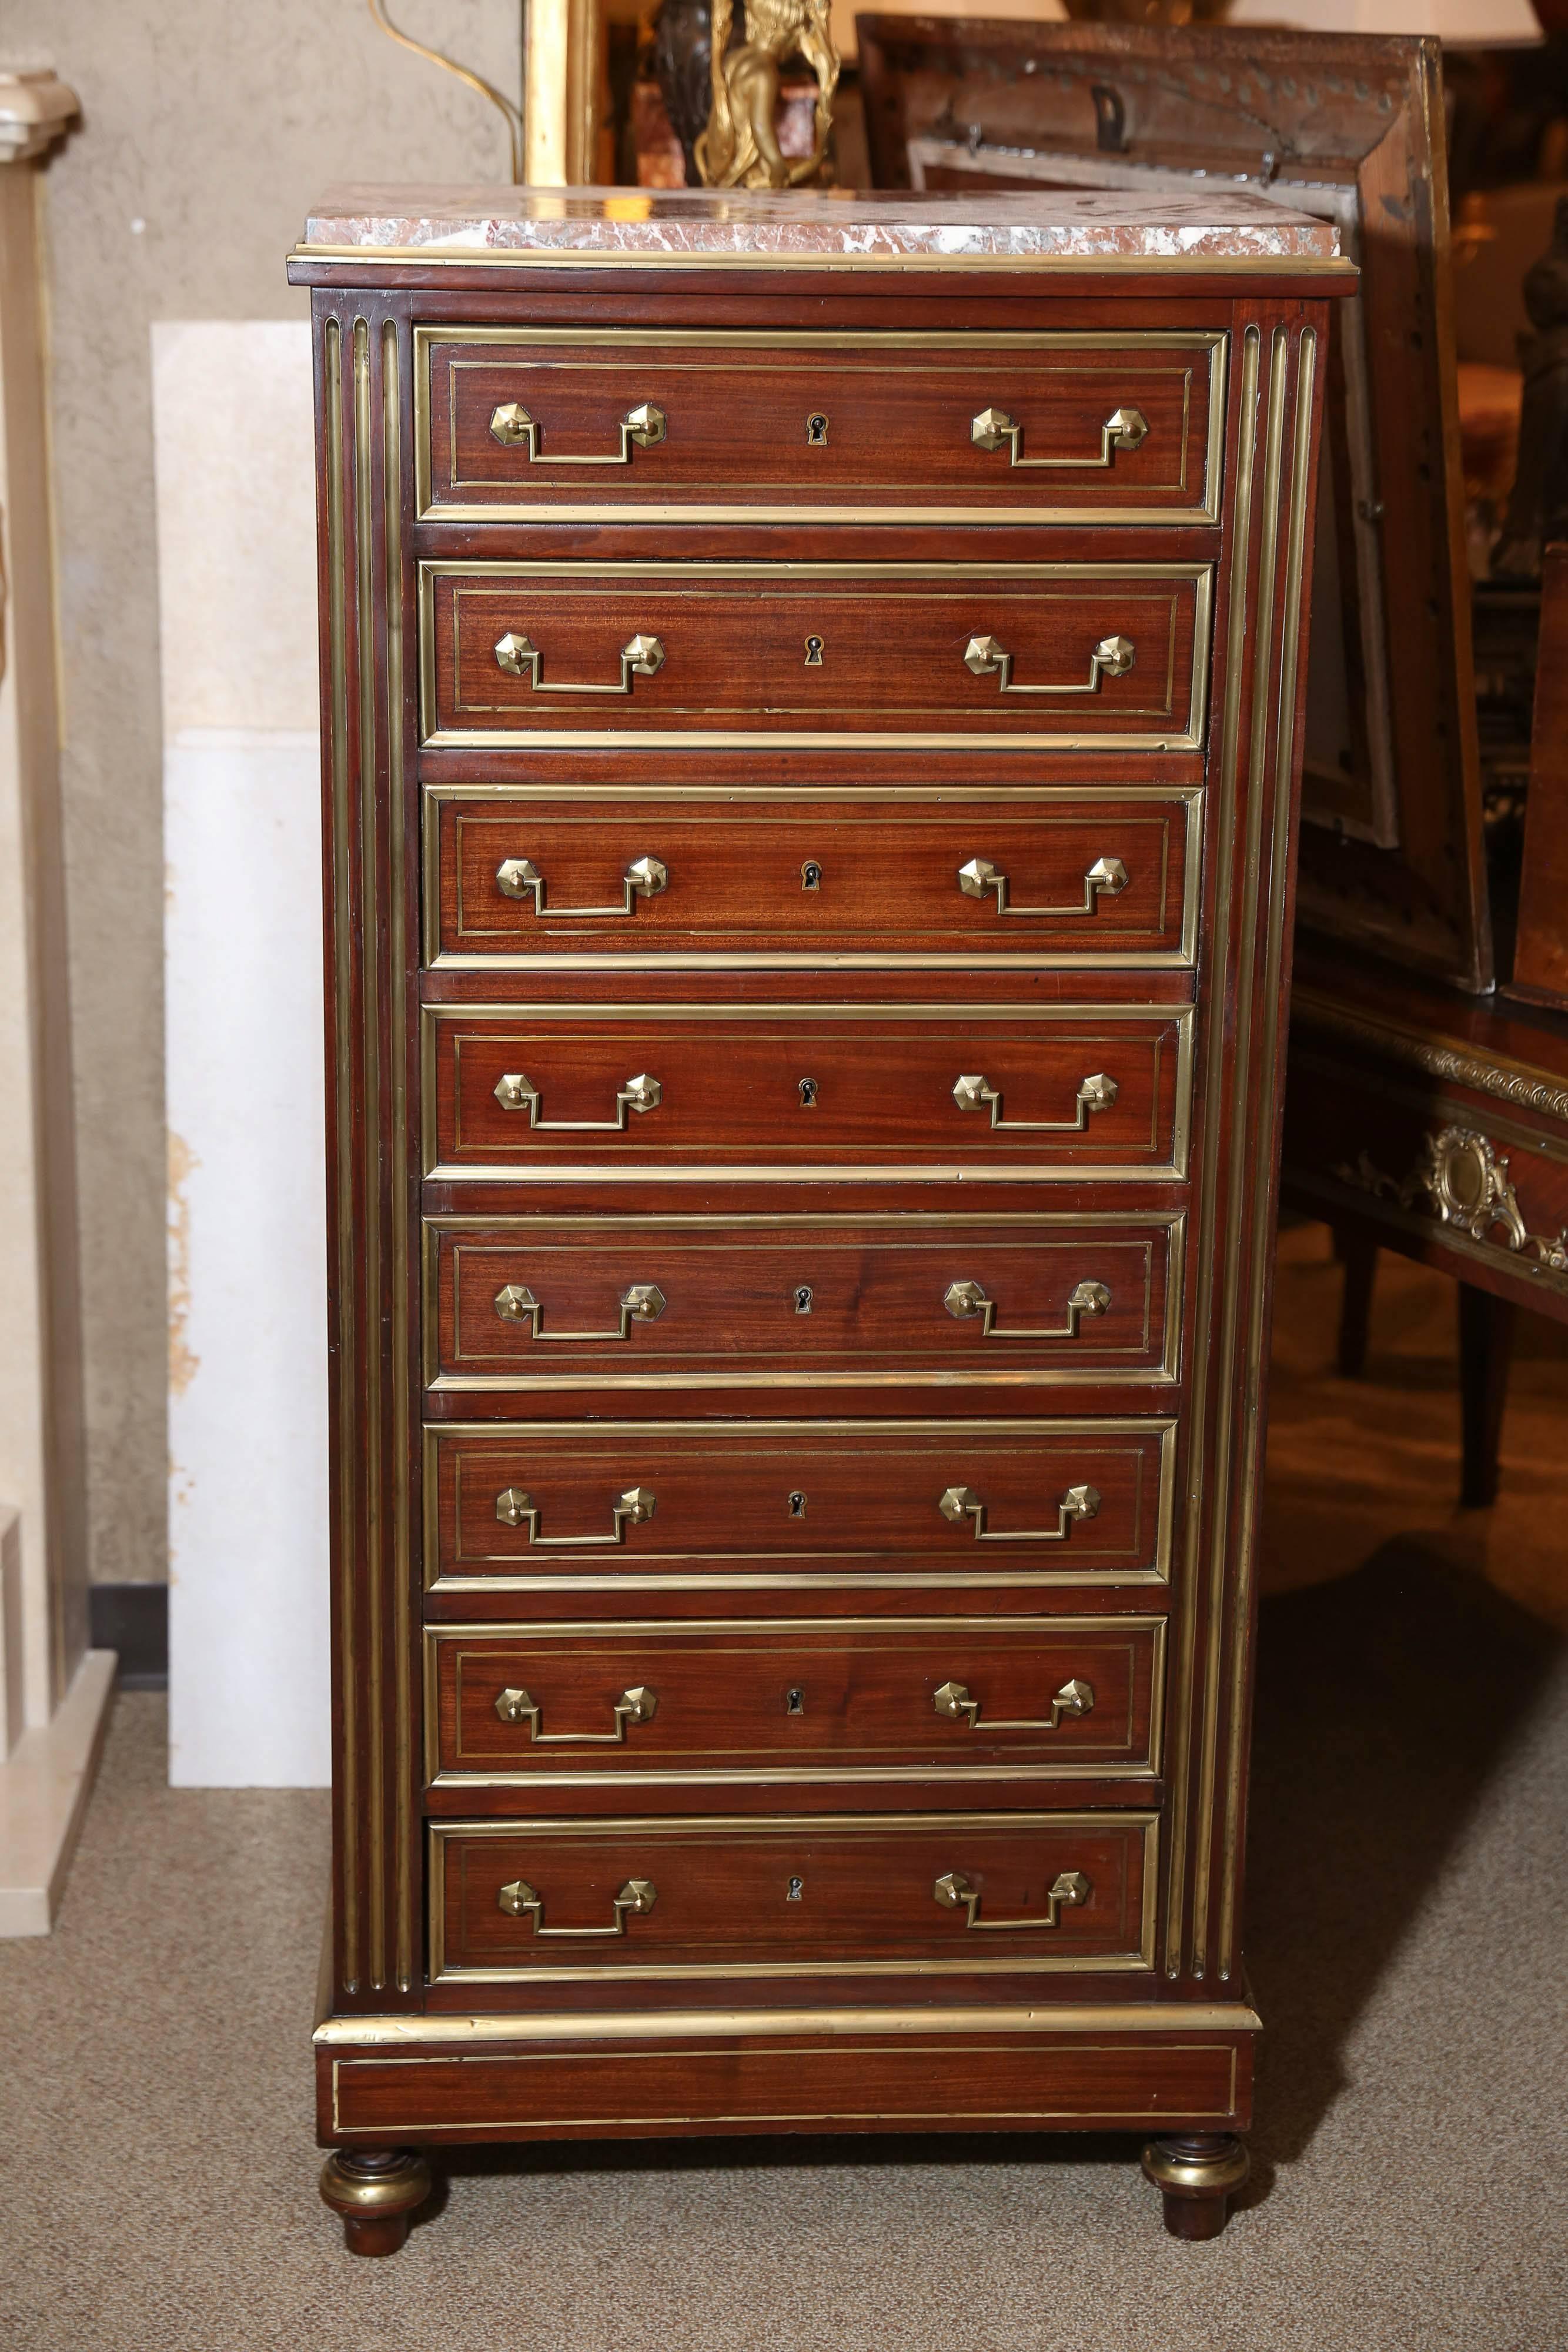 Excellent mahogany tall chest fitted with eight drawers, all with brass banding,
Raised on bulbous feet. The marble top is rectangular and inset on top.